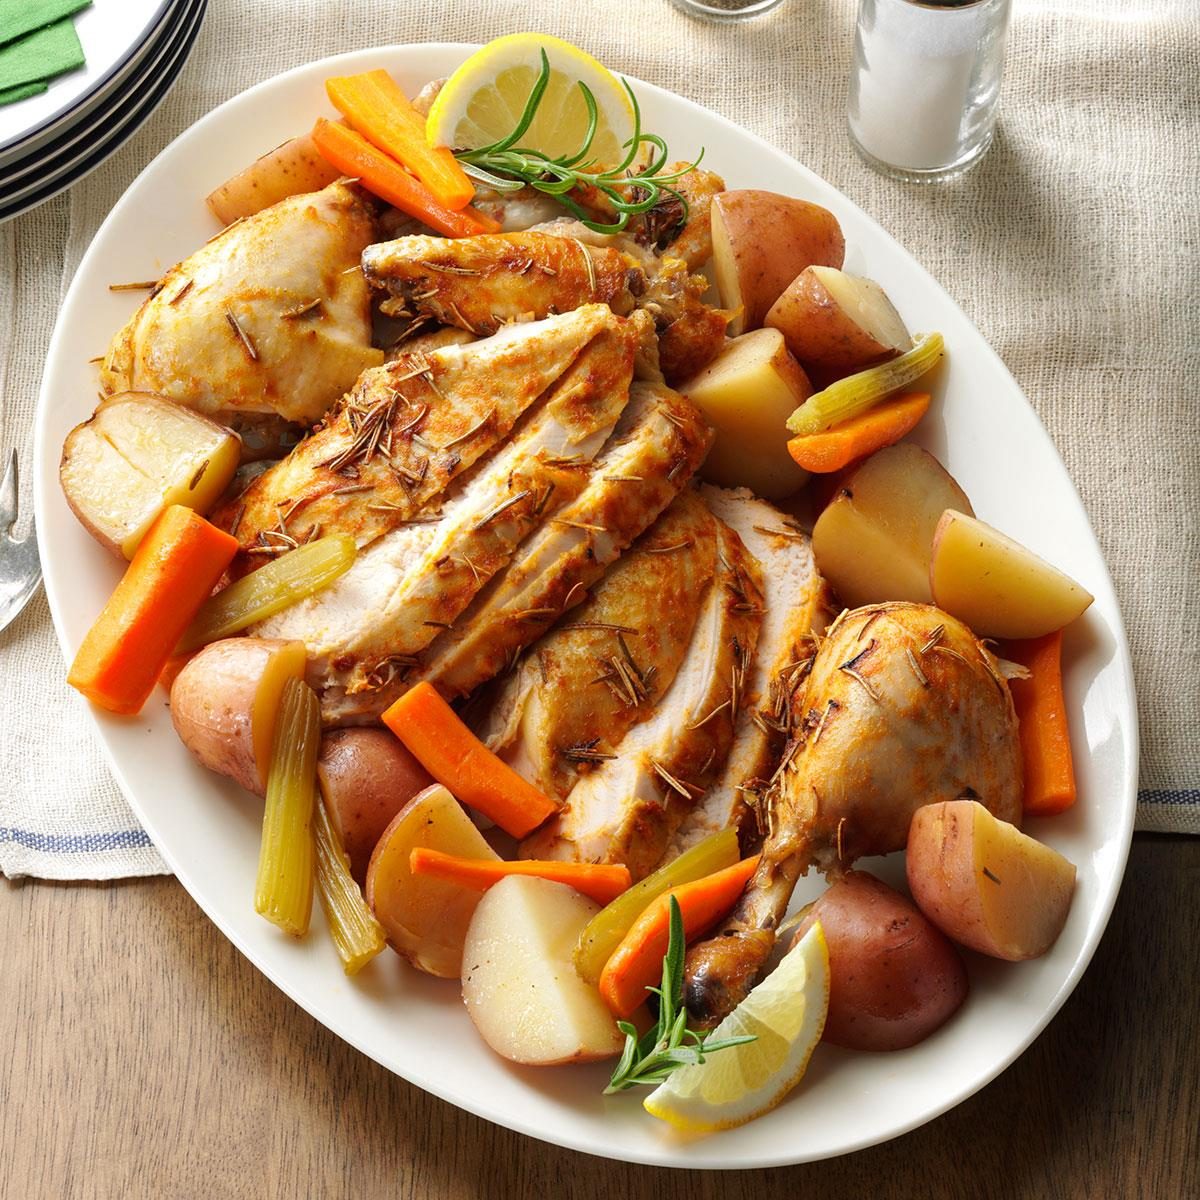 Slow roasted chicken with vegetables recipe